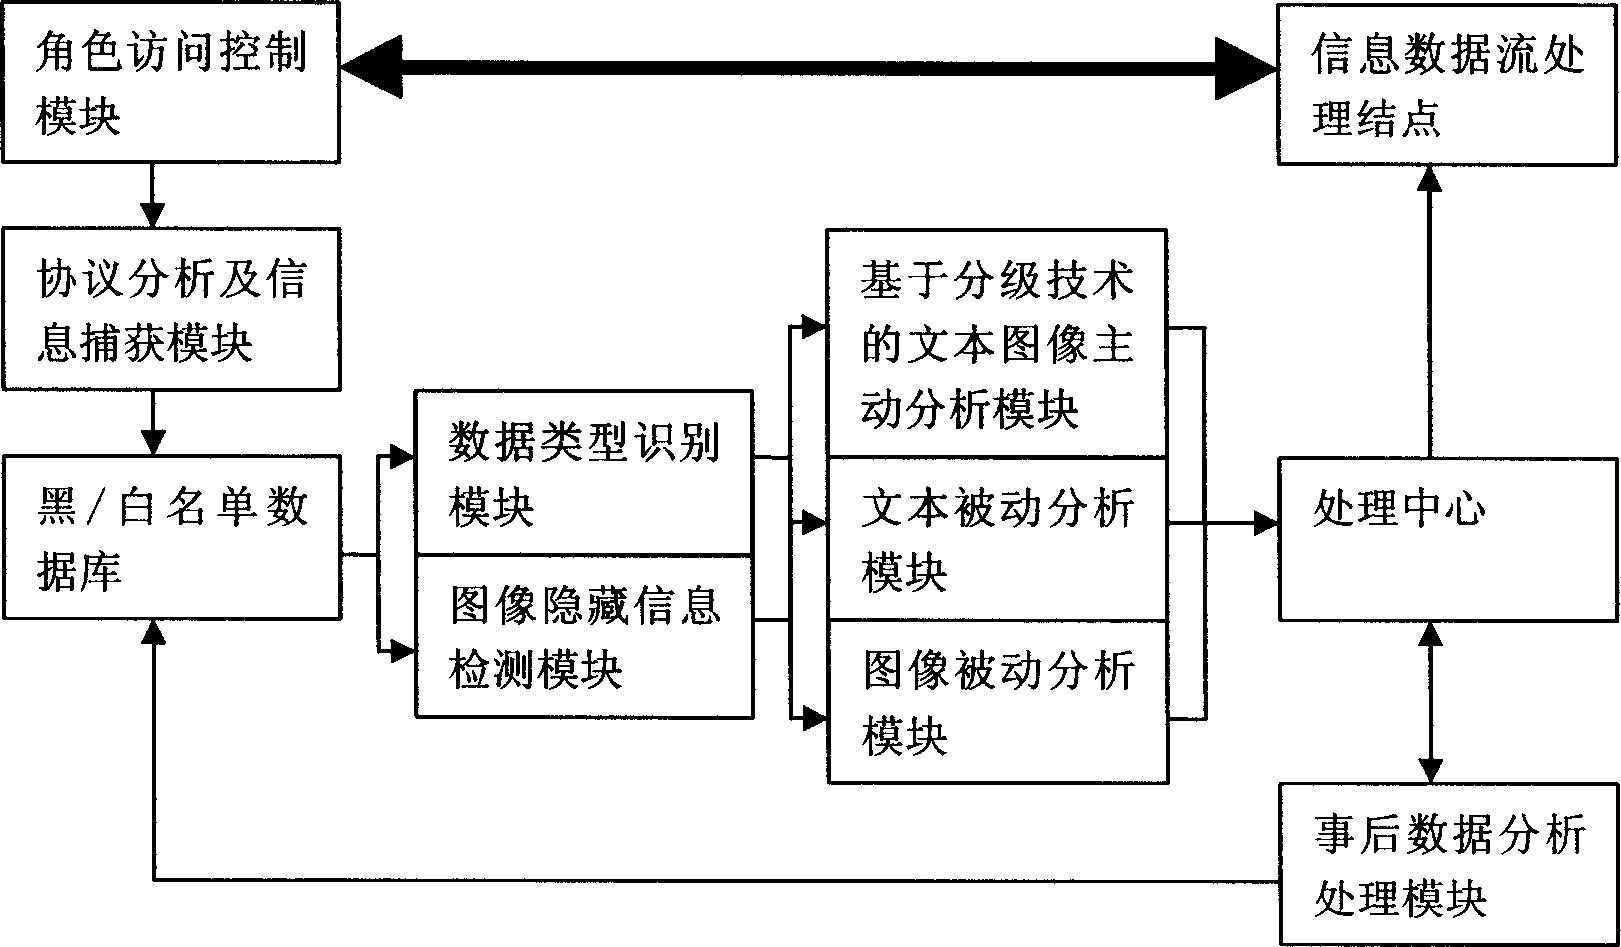 System for synthetical analyzing and monitoring safety of information on network